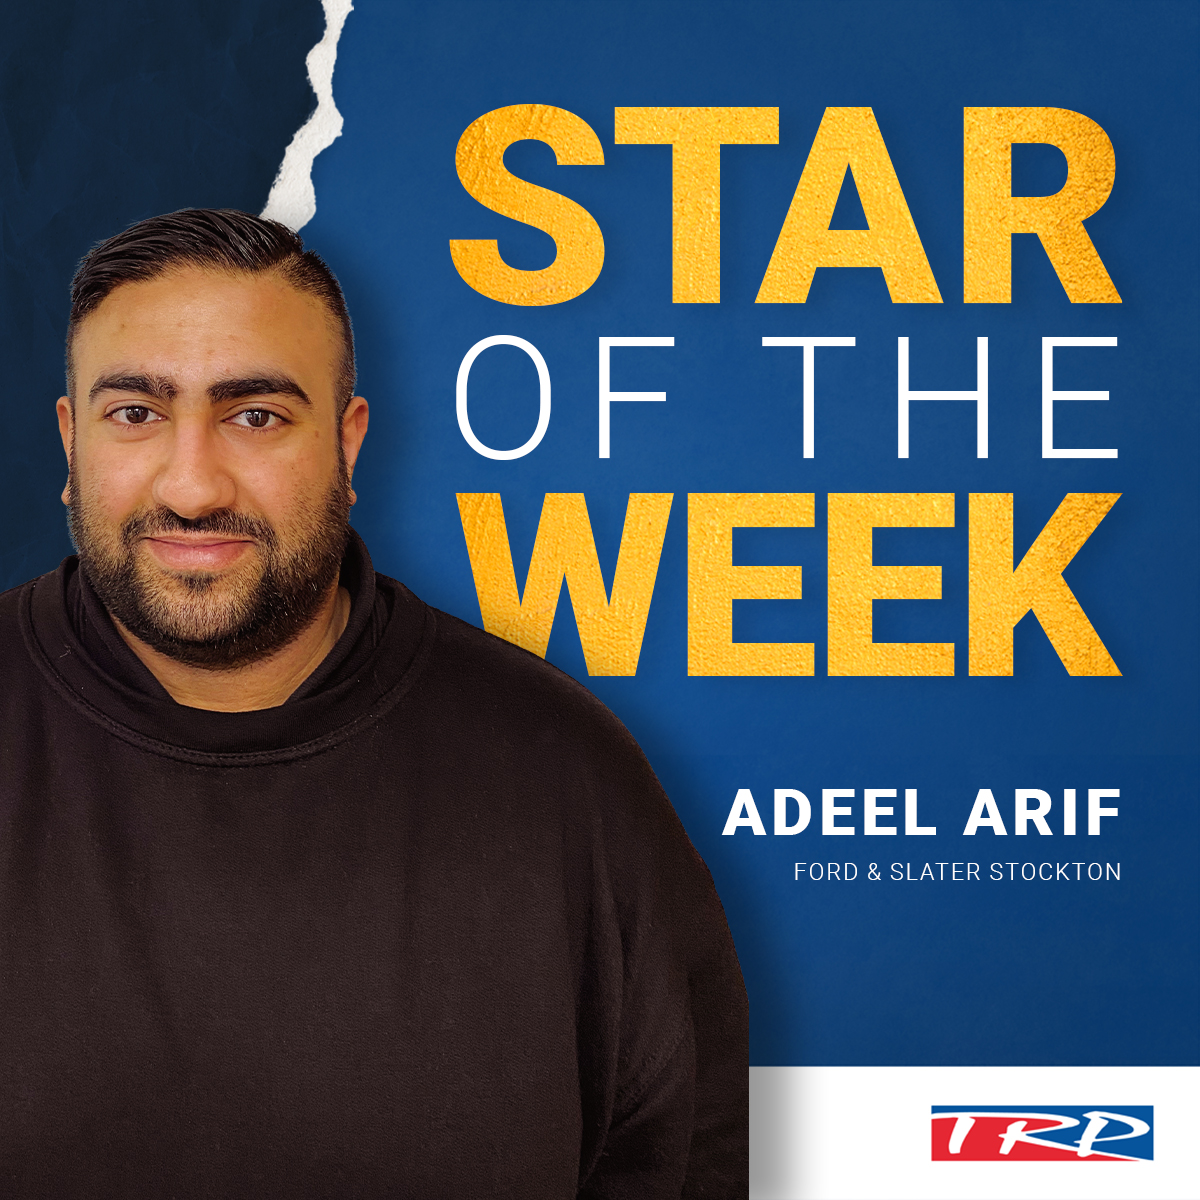 Well done to our Parts Star - Adeel Arif from Ford & Slater Stockton. “Adeel gives so much to the department. His knowledge, work effort and attitude drive sales forward. He builds relationships with customer and will always complete tasks with a positive can do outlook.' 🎉